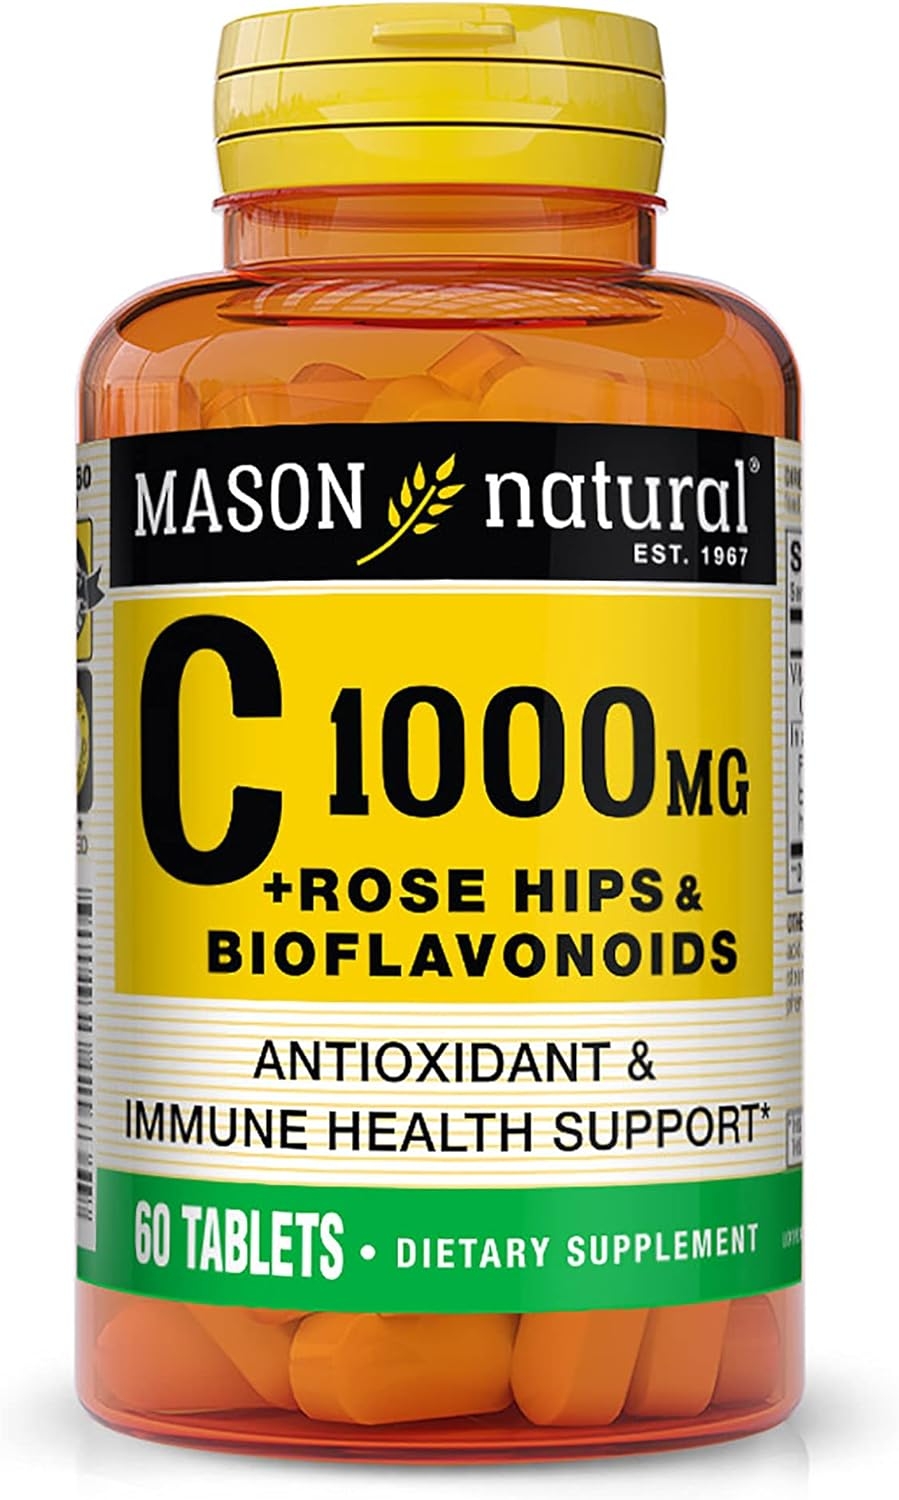 Mason Natural Vitamin C 1,000 mg Plus Rose Hips and Bioflavonoids Complex - Supports a Healthy Immune System, Antioxidant and Essential Nutrient, 60 Tablets